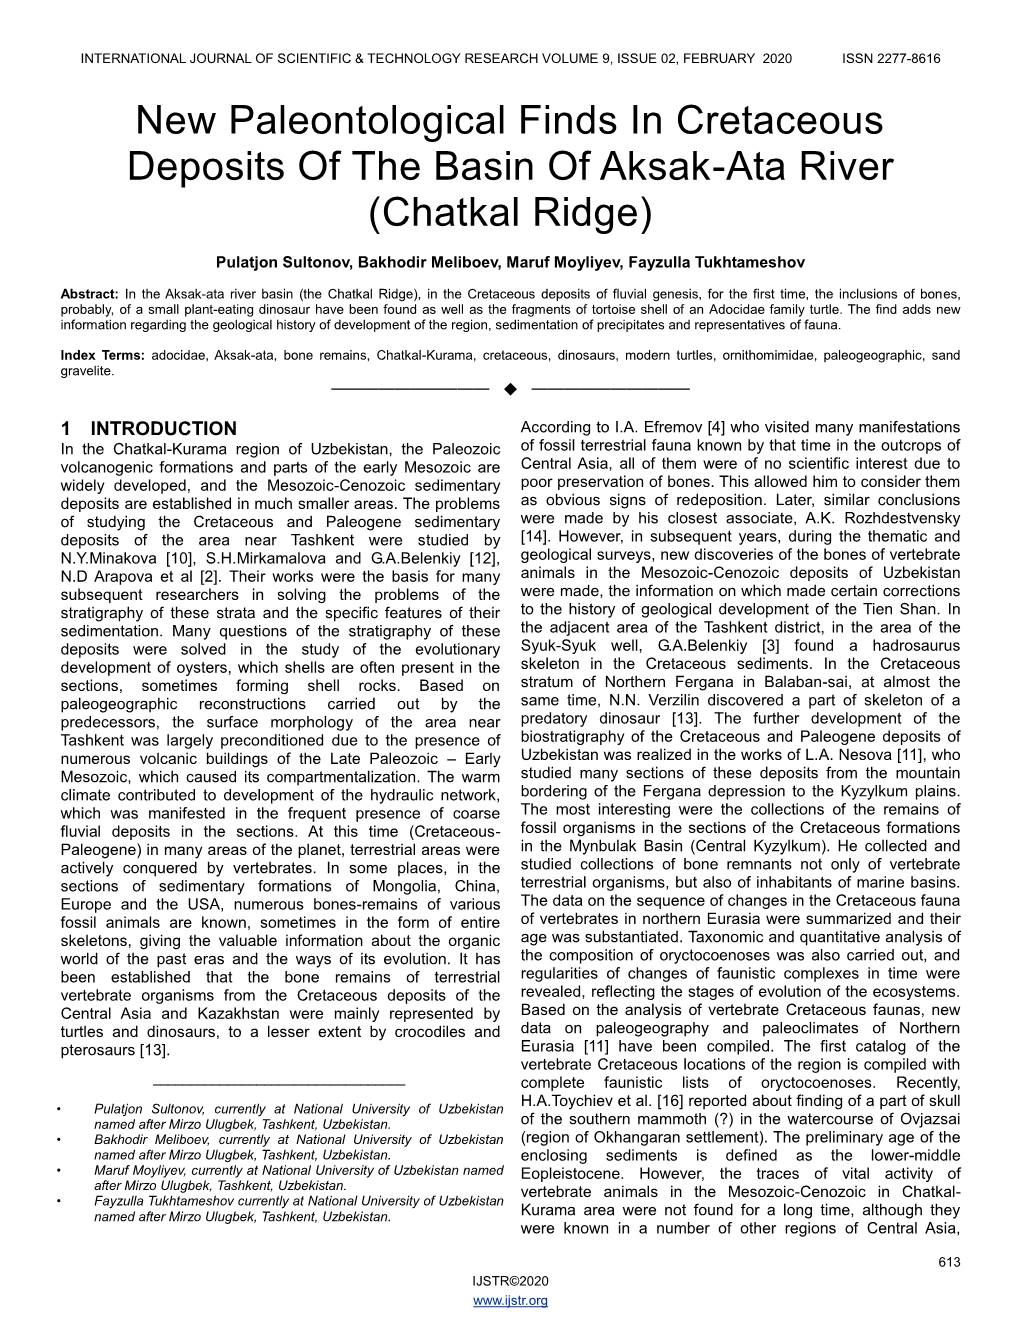 New Paleontological Finds in Cretaceous Deposits of the Basin of Aksak-Ata River (Chatkal Ridge)